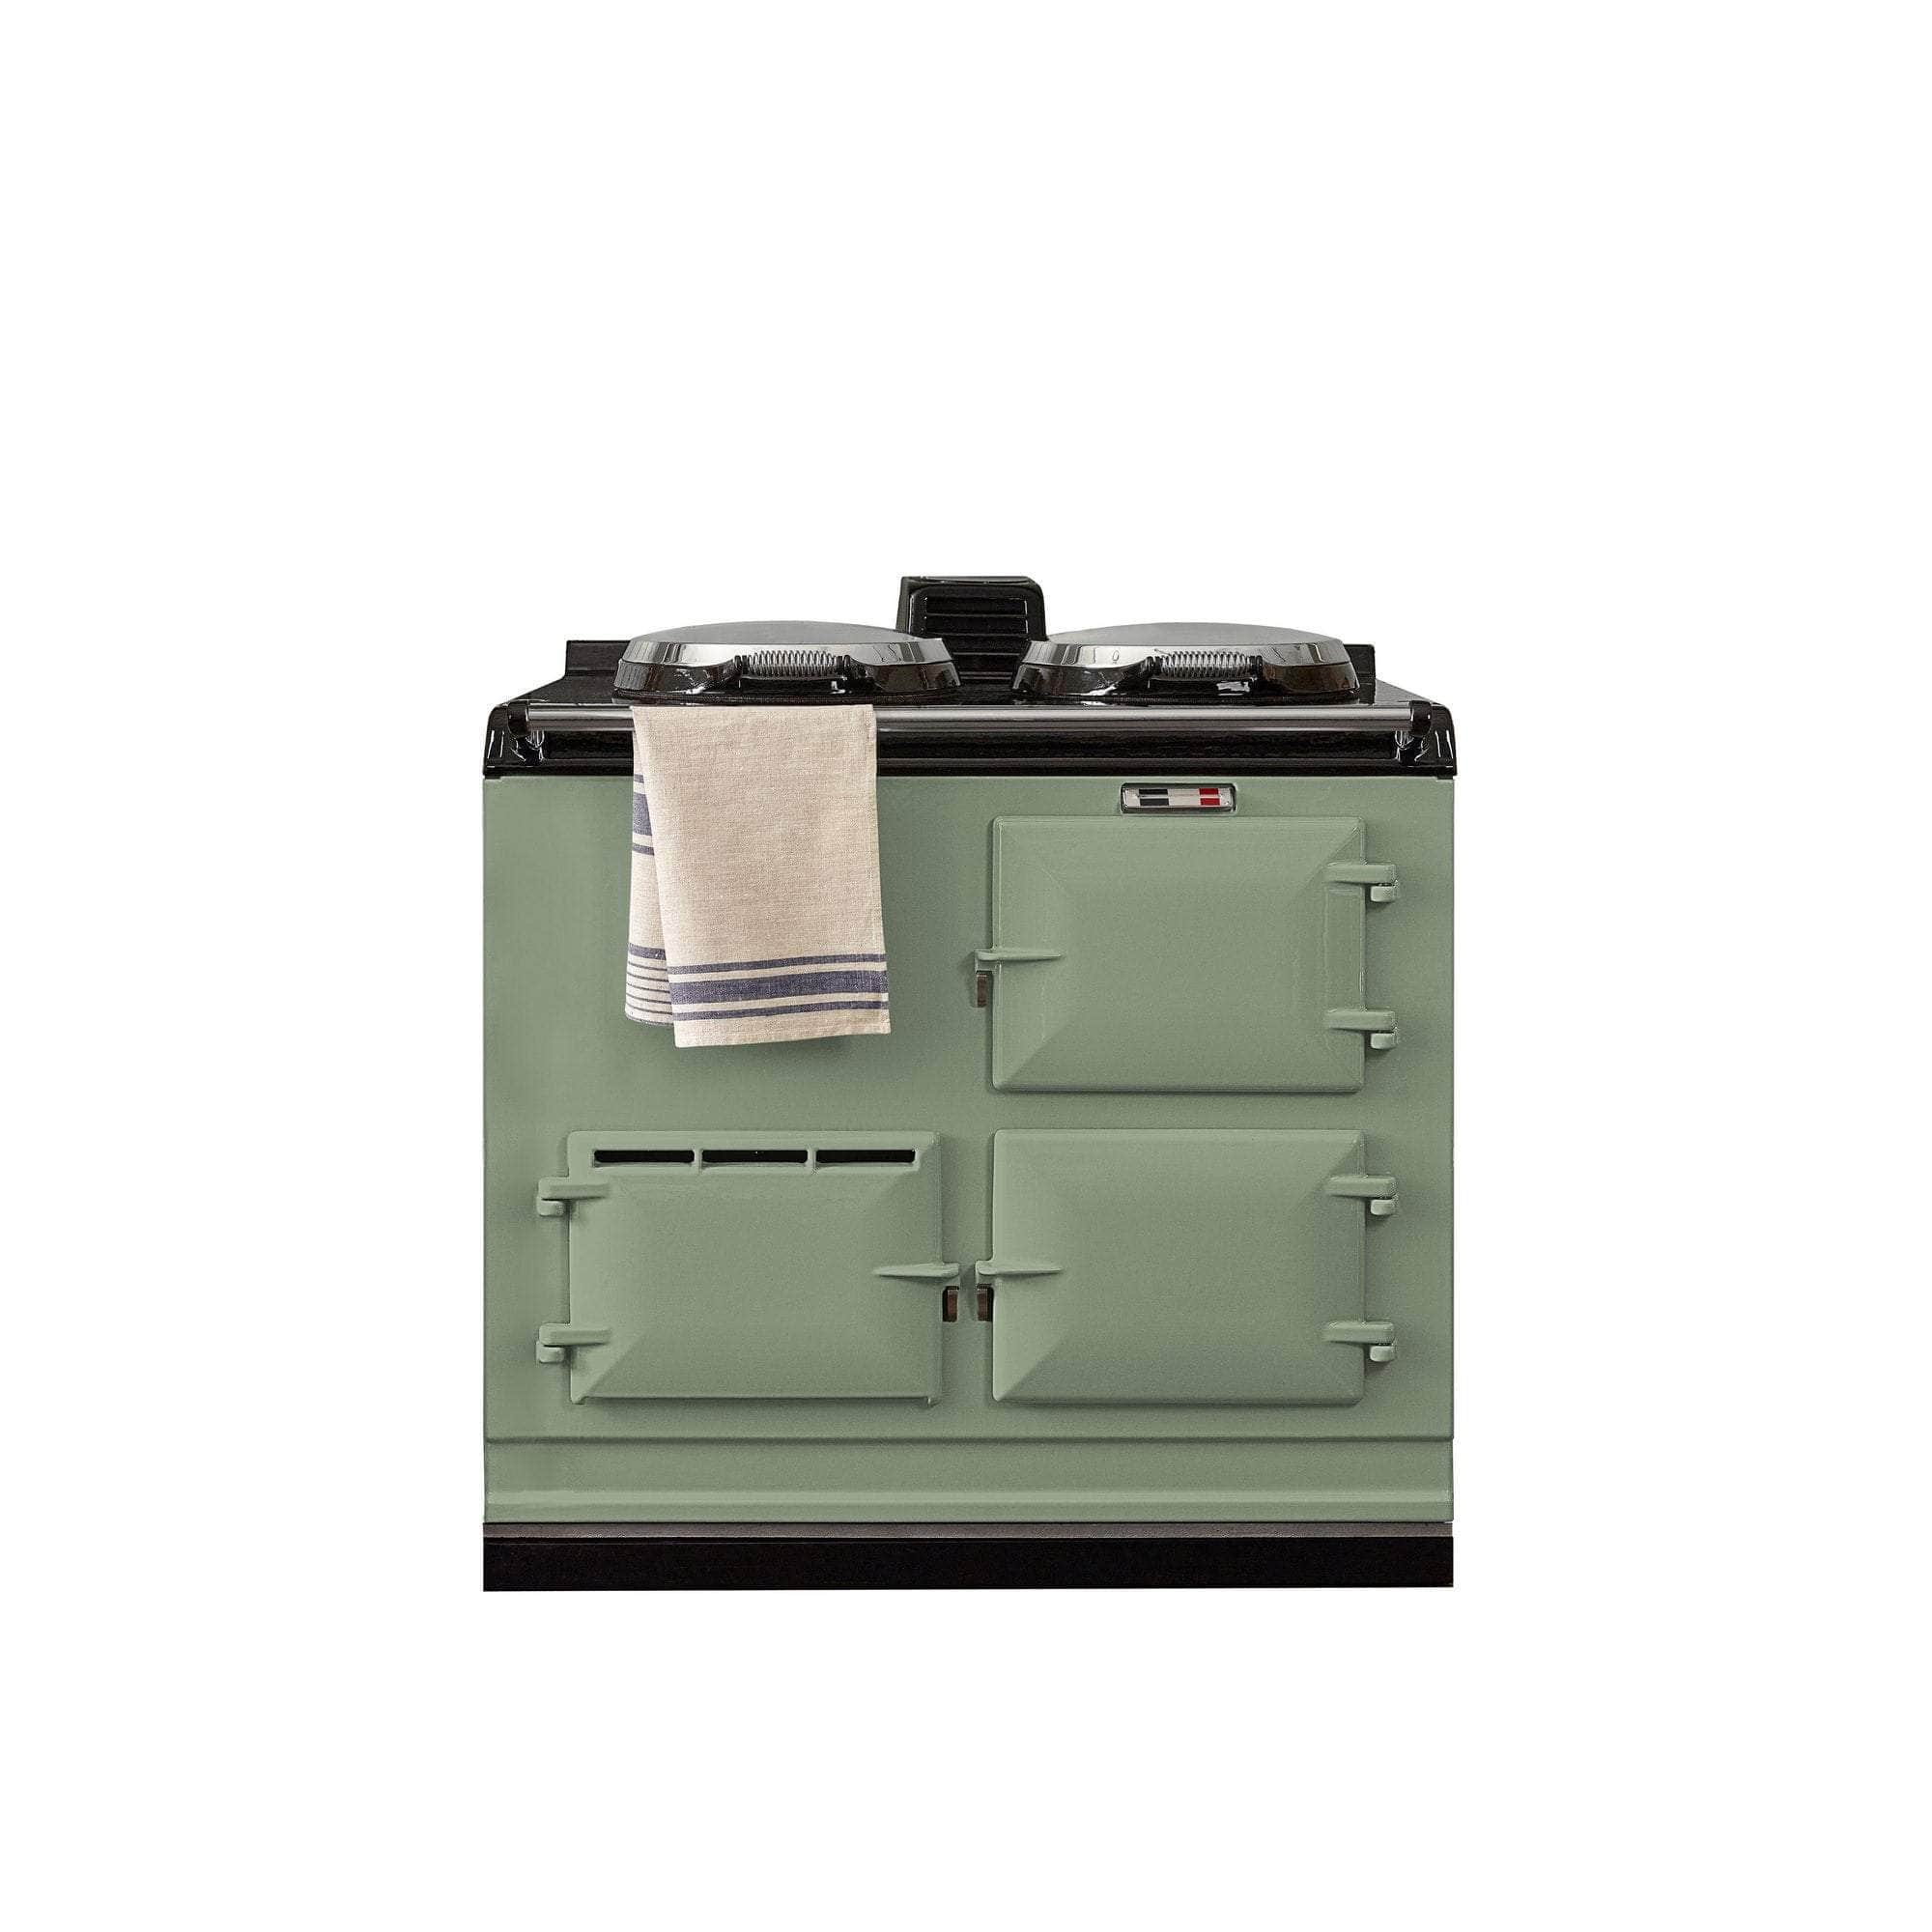 2 Oven Modern Style Remanufactured Aga cooker by Blake & Bull® | Electric | Lamb's Ear